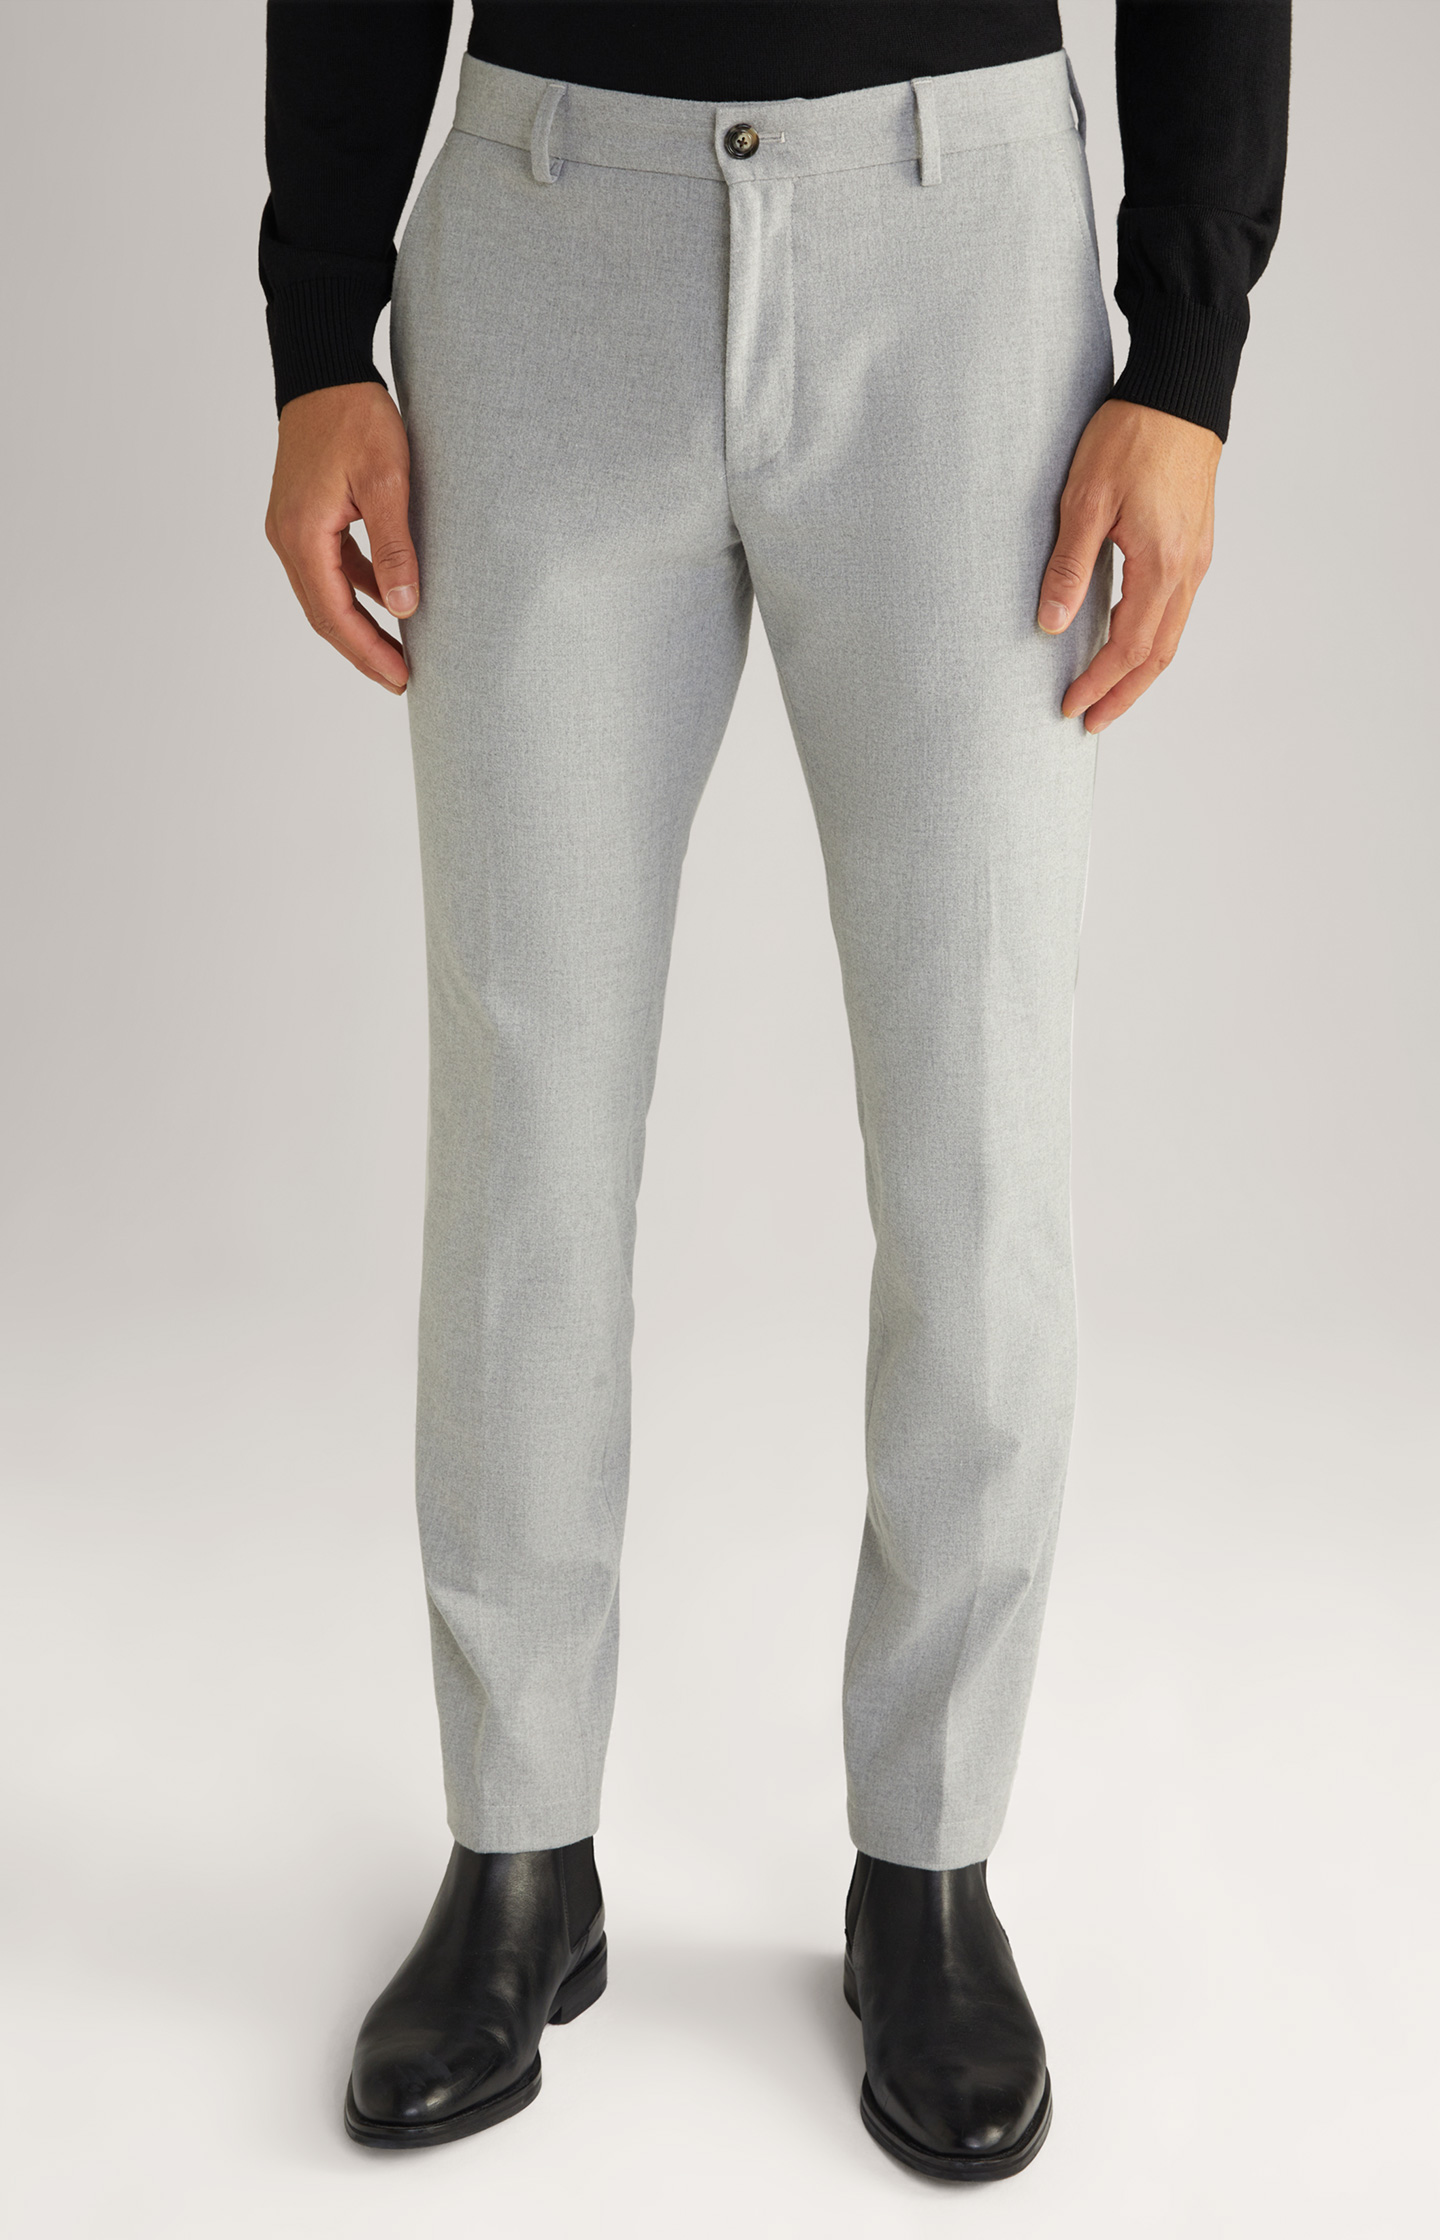 New Look skinny suit pants in light gray check | ASOS